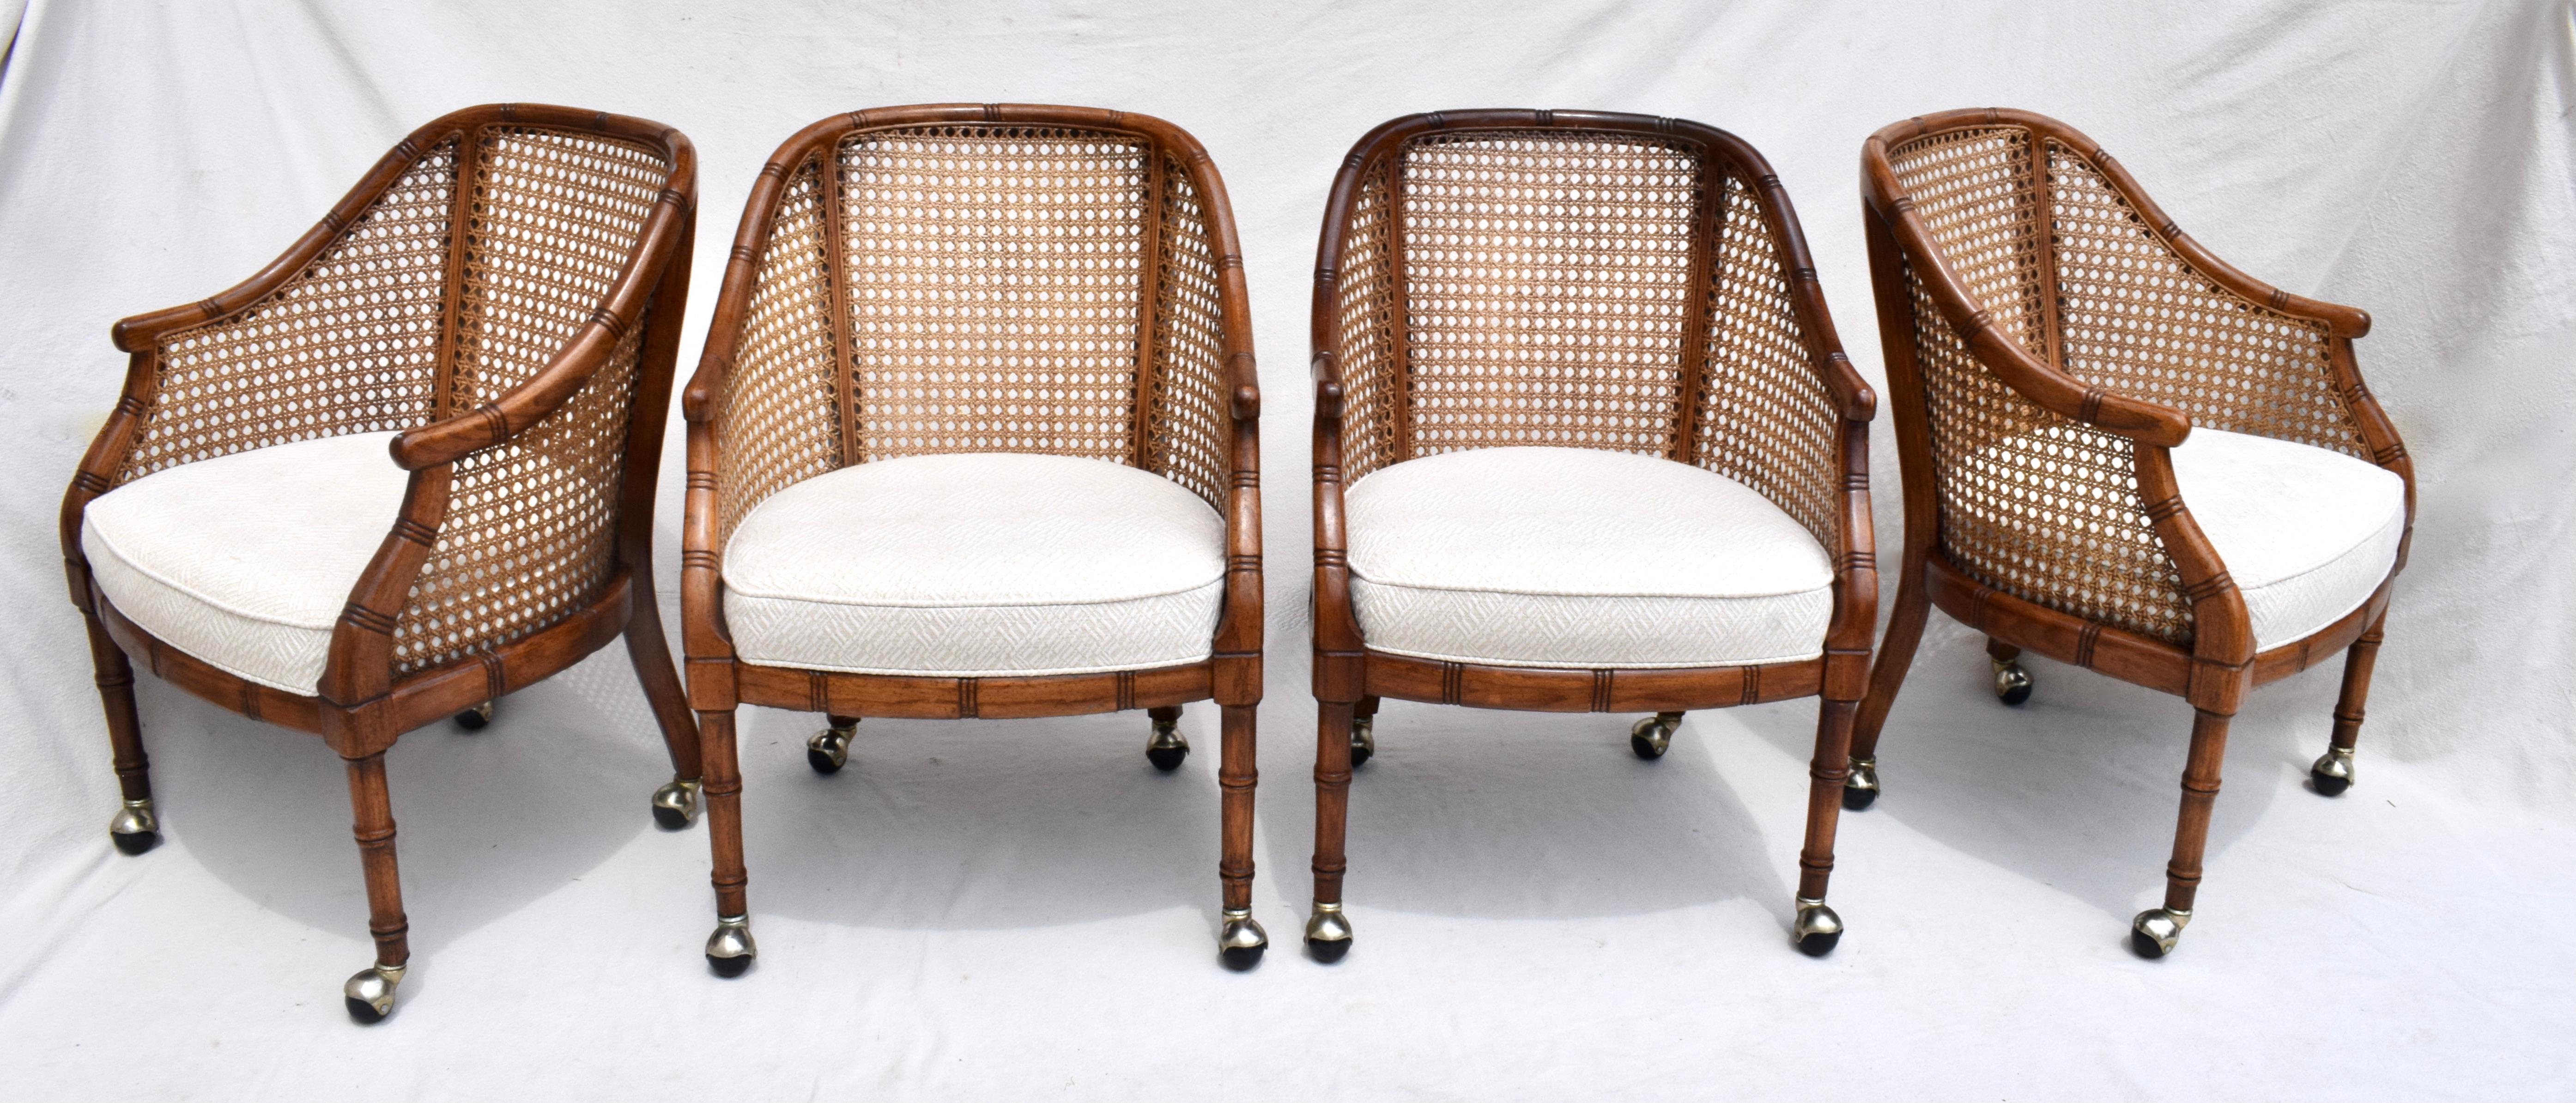 Hollywood Regency Set of Four Caned Barrel Chairs on Casters